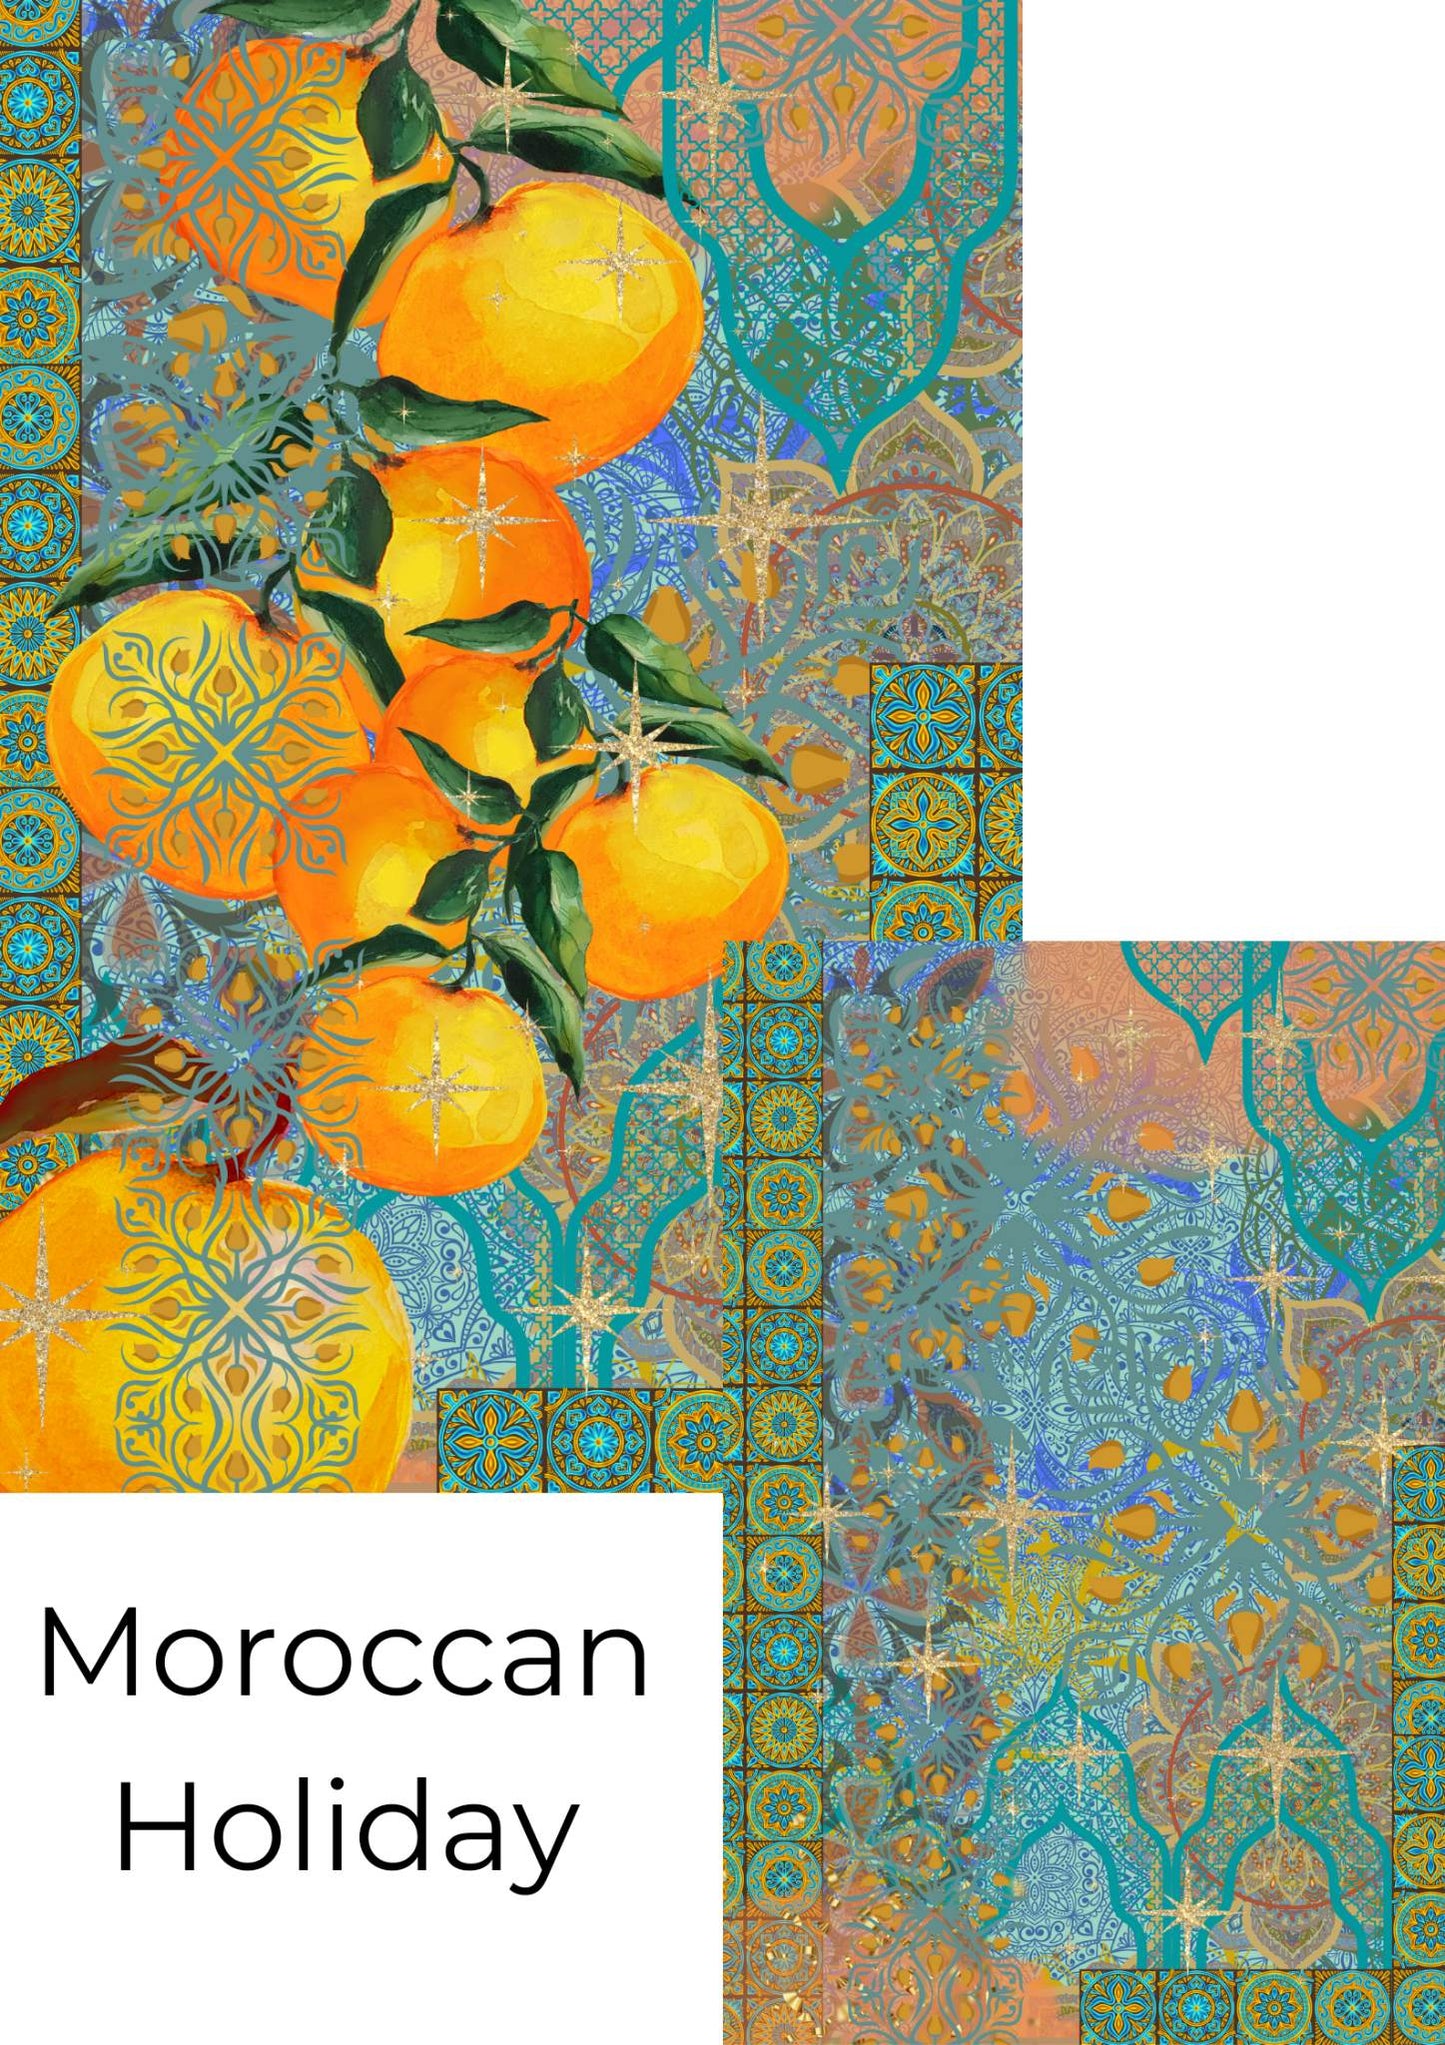 Moroccan Holiday - Made by Marley, Decoupage Paper